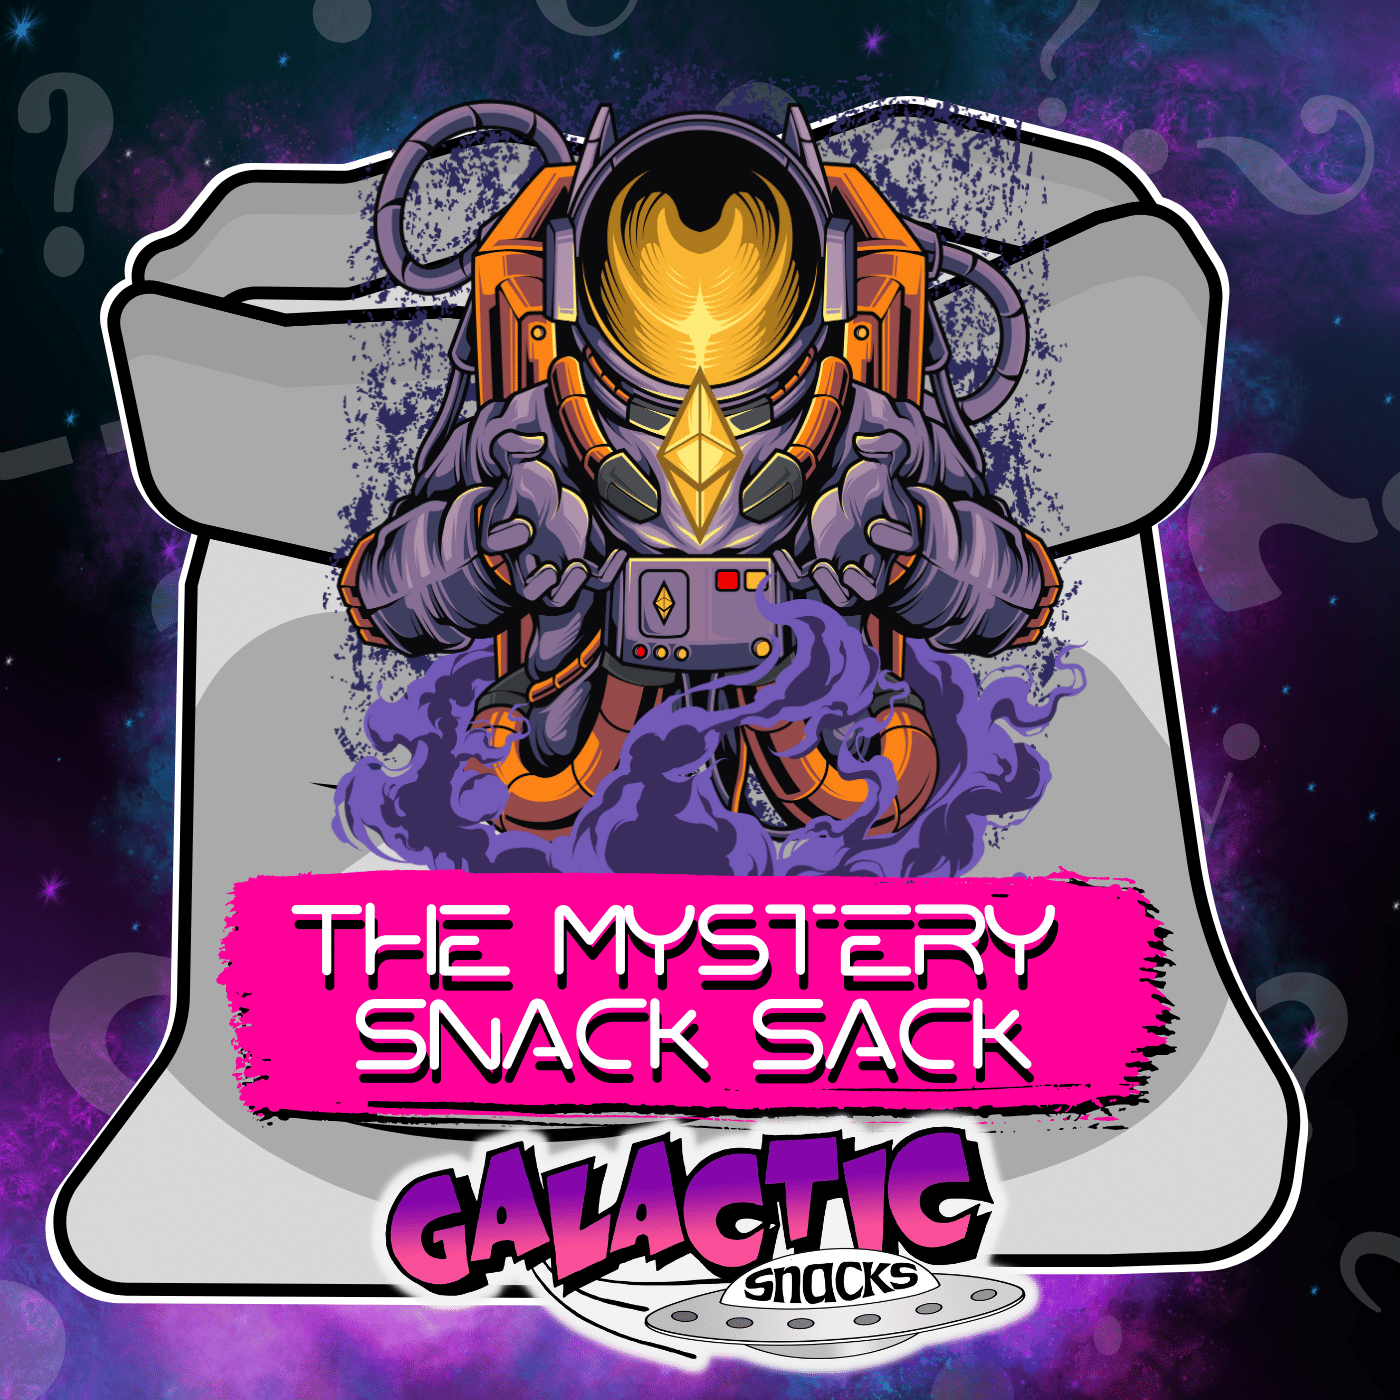 The Mystery Snack Sack